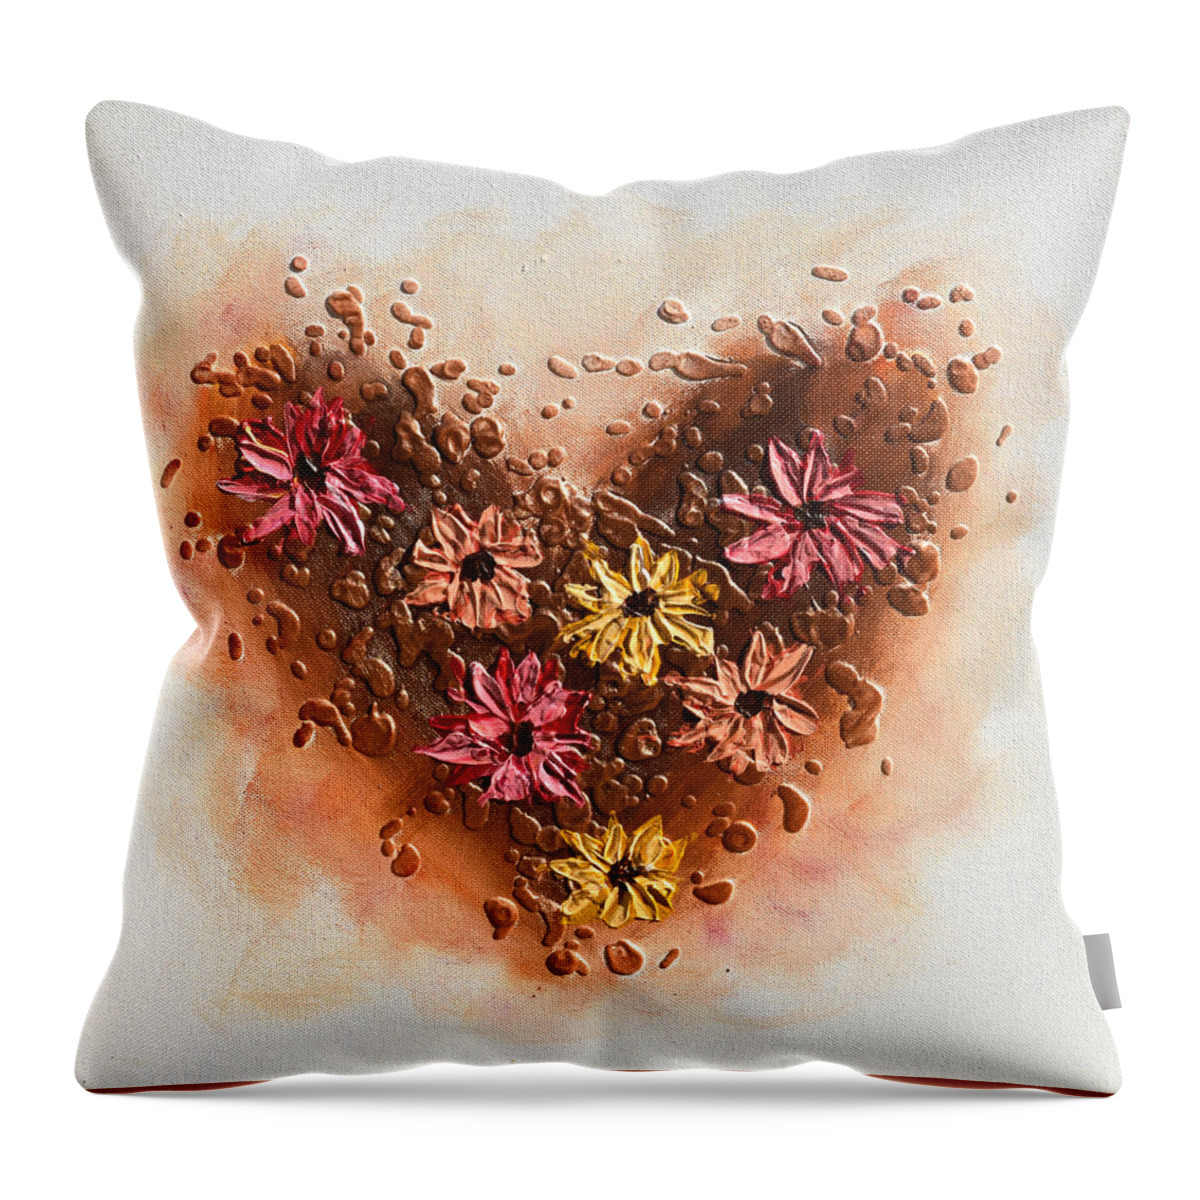 Heart Throw Pillow featuring the painting A floral Heart by Amanda Dagg